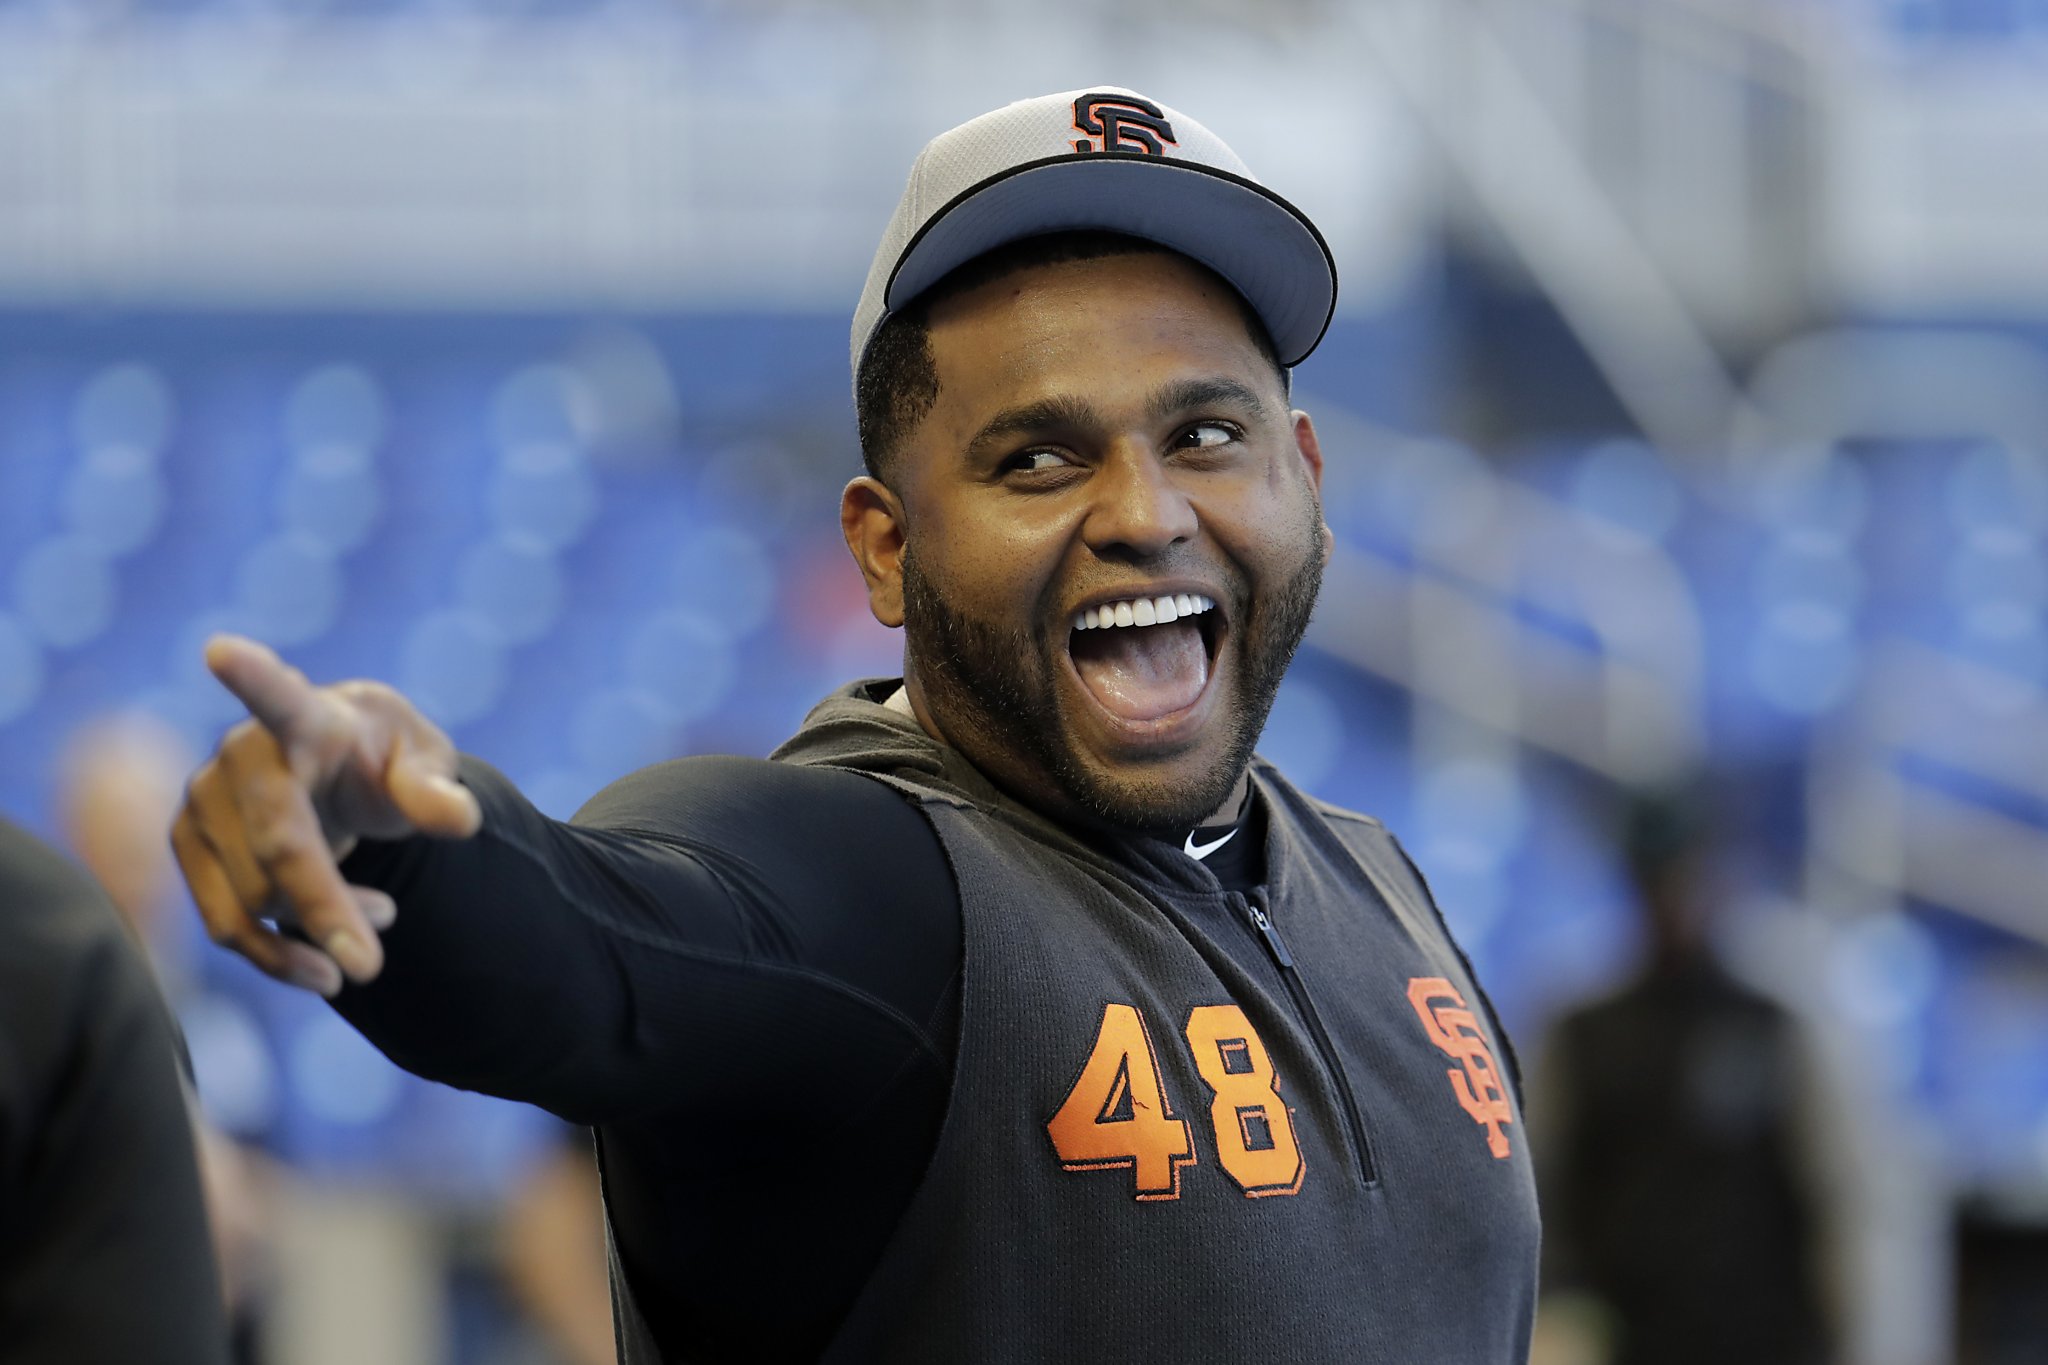 Report: Pablo Sandoval, SF Giants agree to contract